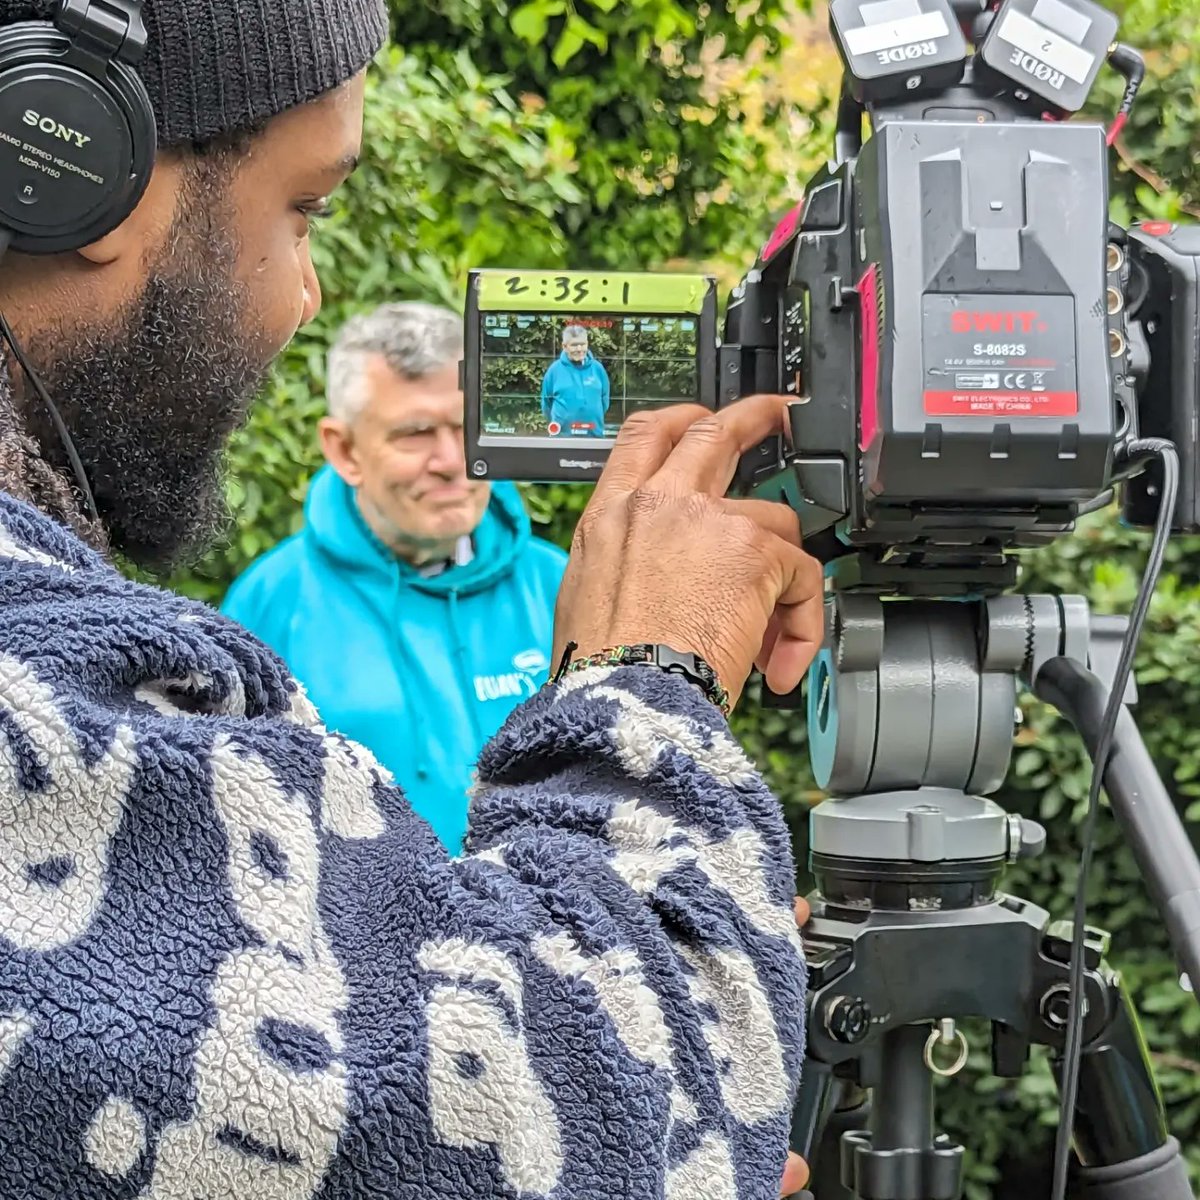 We've been talking to Periscope today about the green spaces in Lewisham! They asked us what we thought of the green spaces, what we like to do there and what we'd like to change about them. @pagelloyd29
#greenspaces #learningdisability #lewisham #selfadvocacy